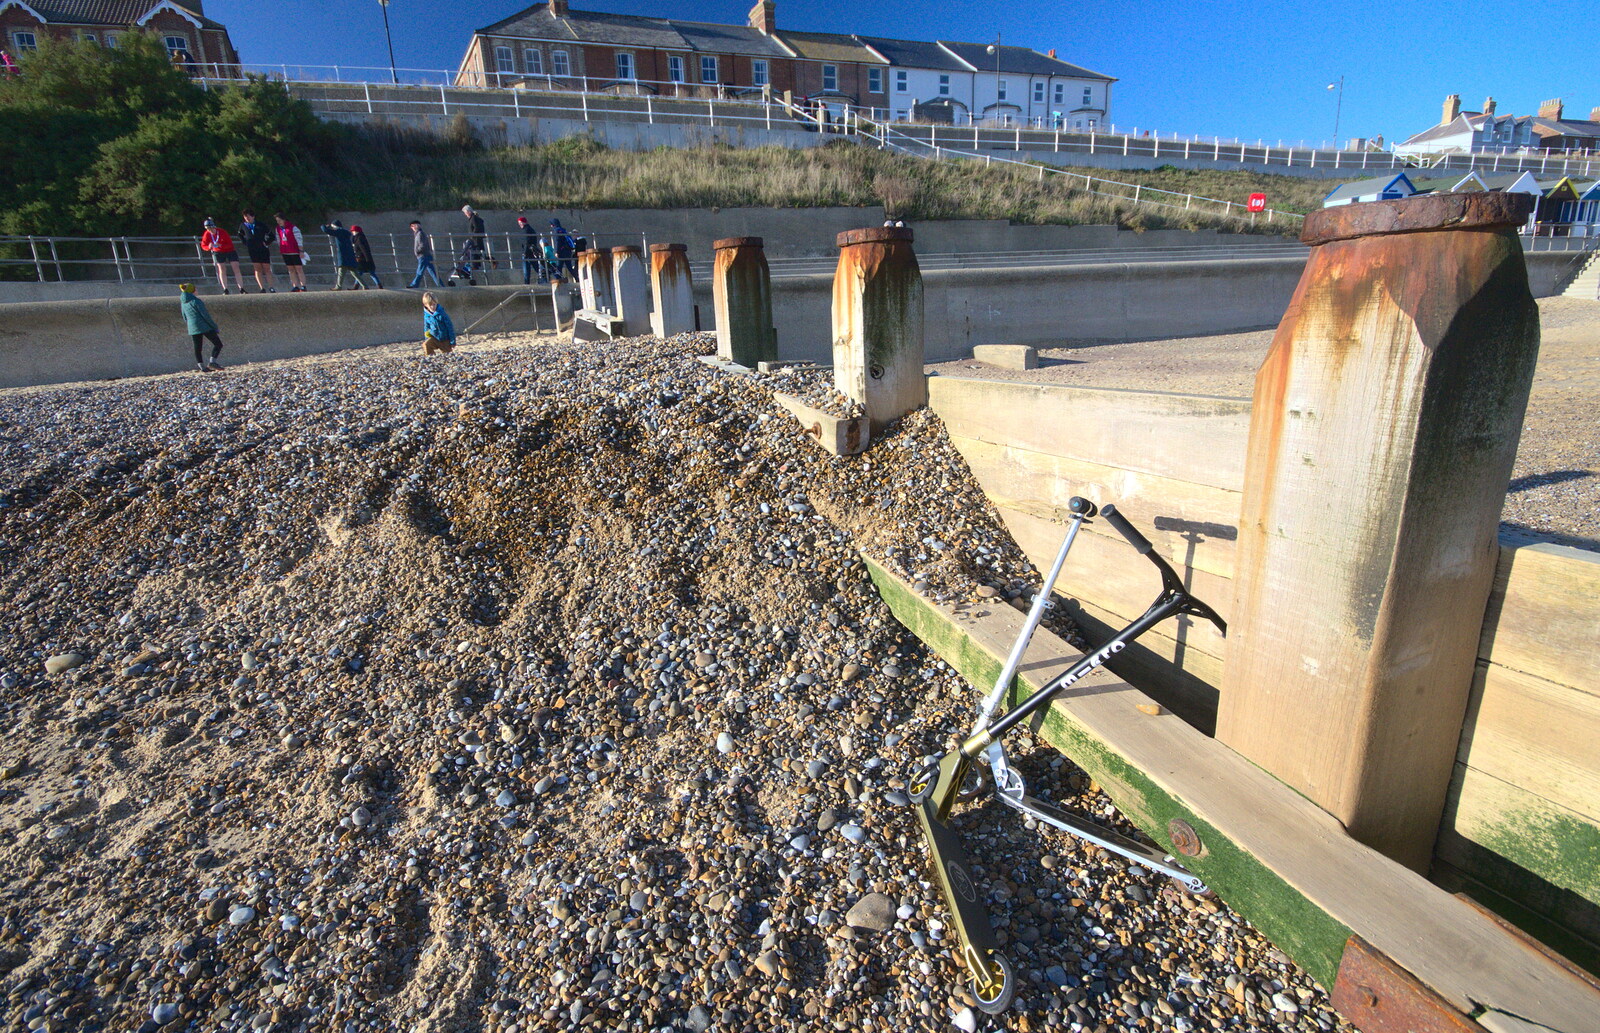 Abandoned scooters from Sunset at the Beach, Southwold, Suffolk - 18th November 2018